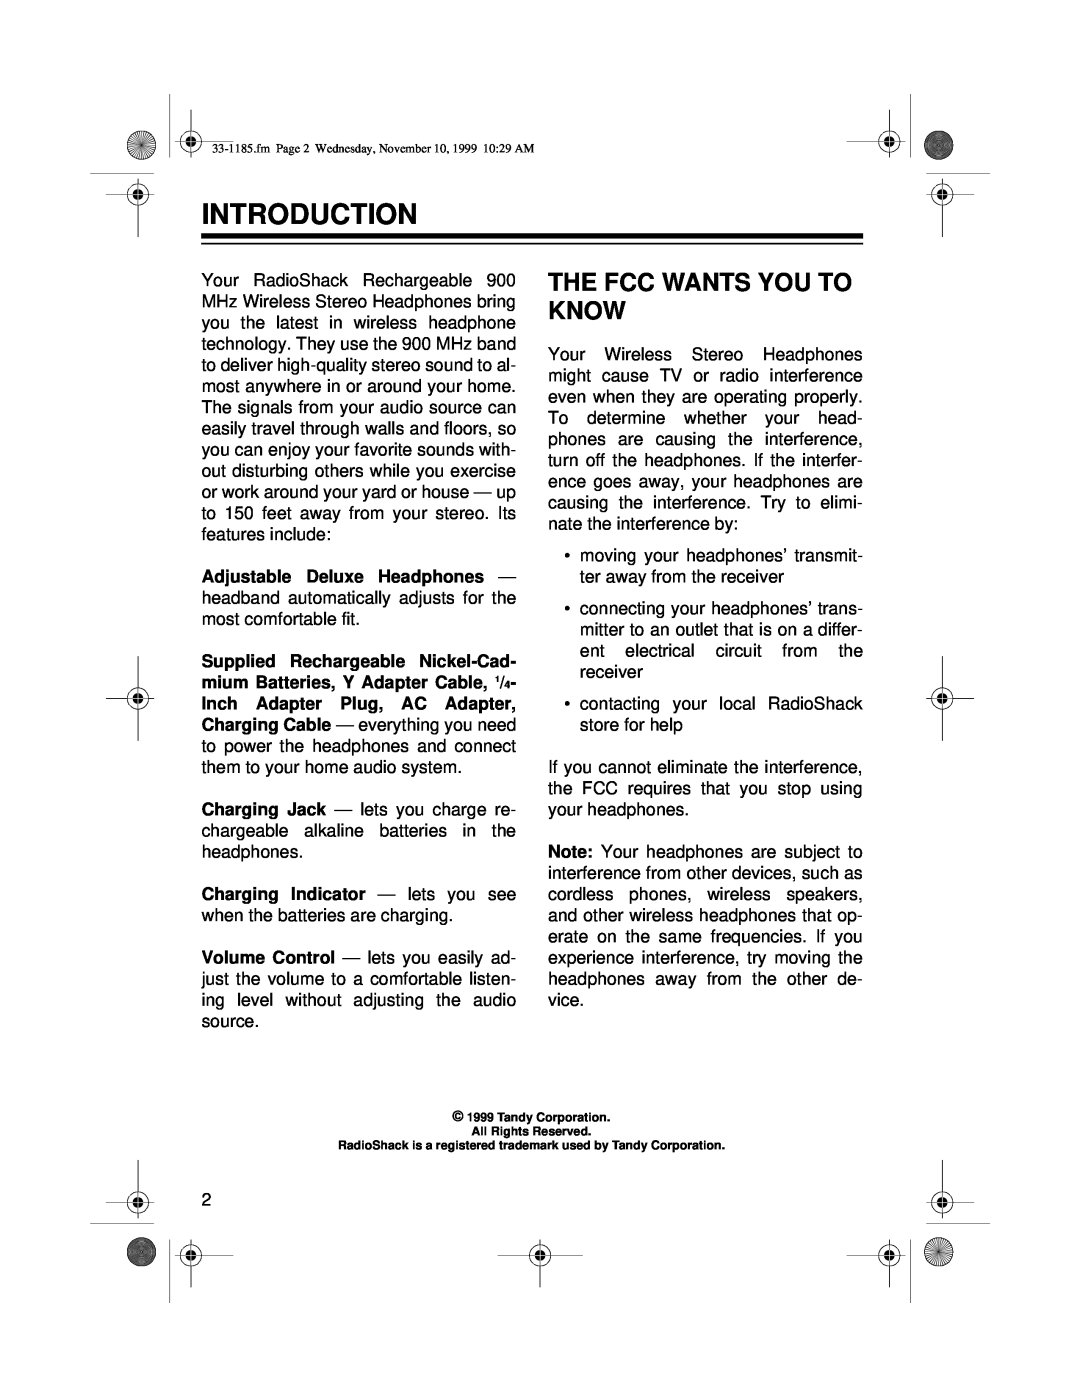 Radio Shack 33-1185 owner manual Introduction, The Fcc Wants You To Know 